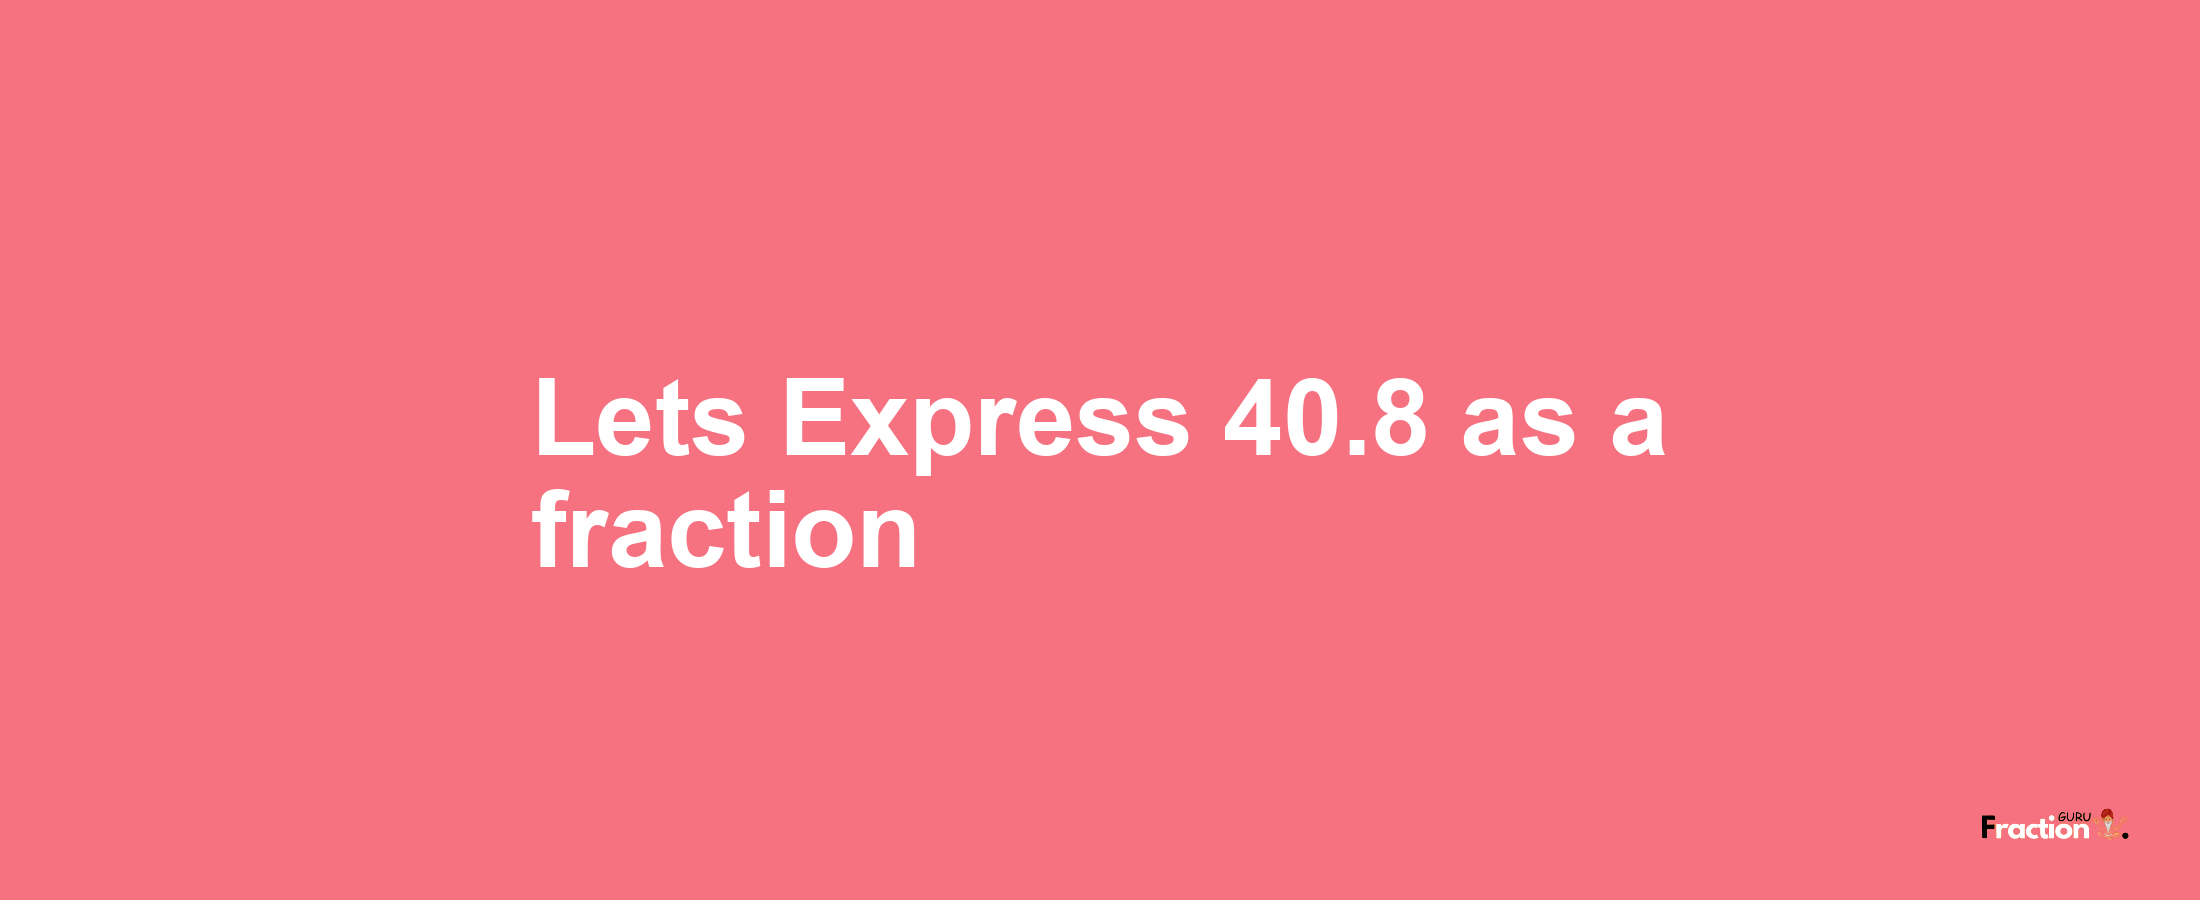 Lets Express 40.8 as afraction